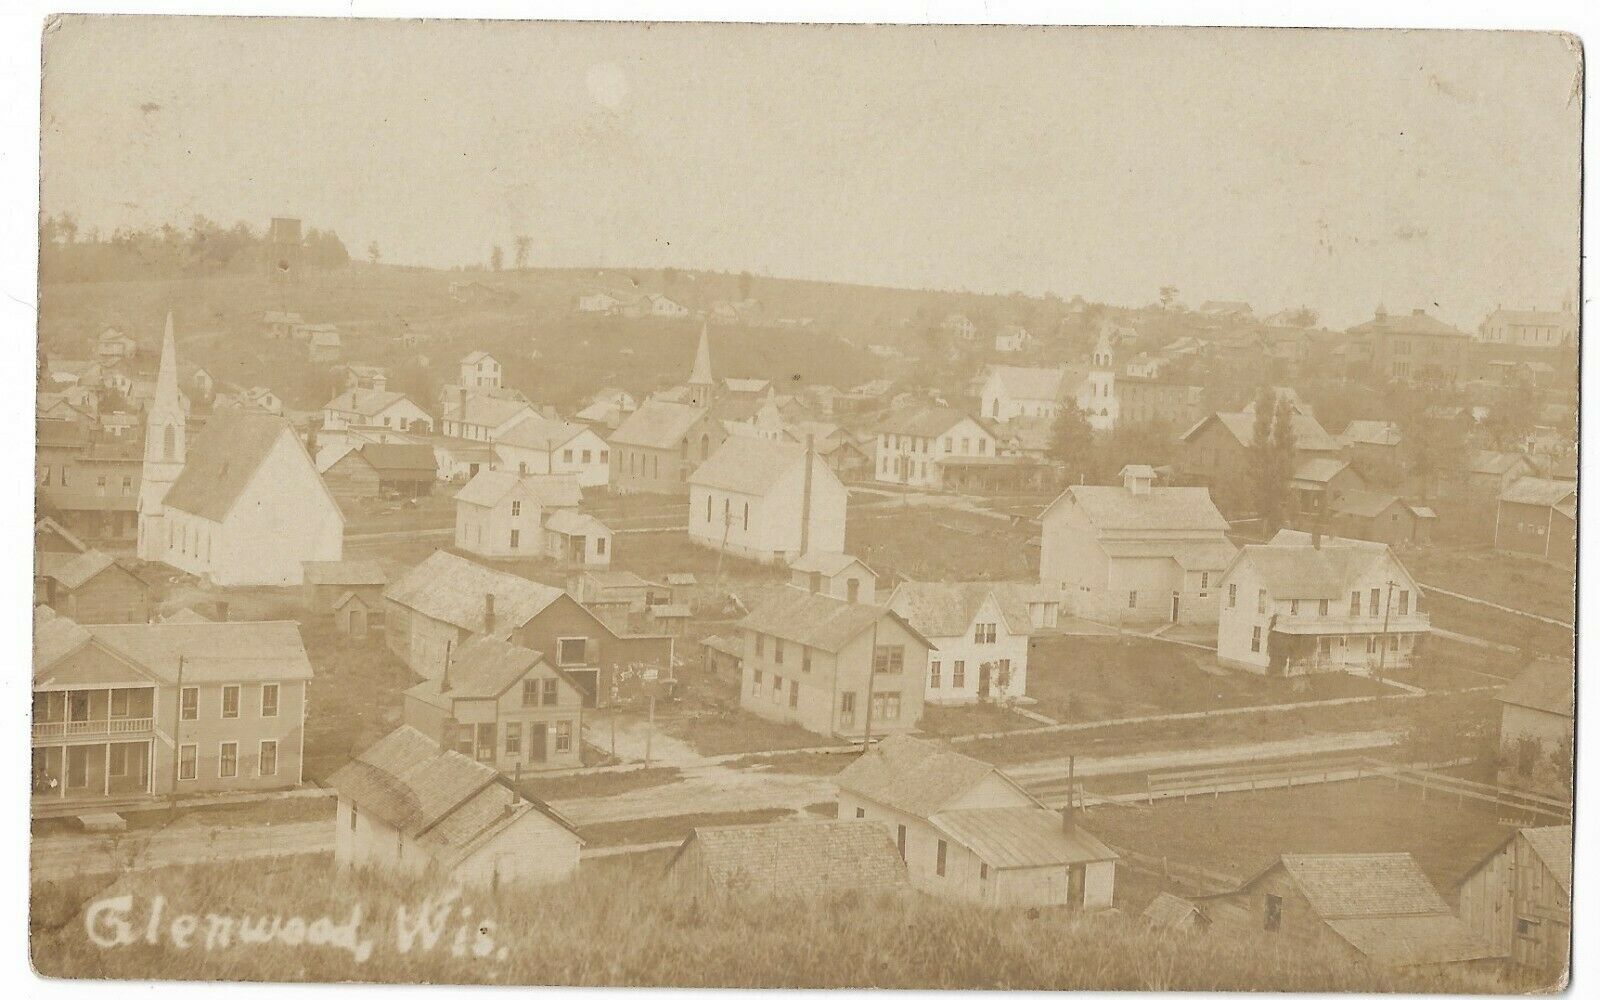 Rppc St. Croix, Glenwood Wisconsin Town View Real Photo Wis Pc Church & Resident